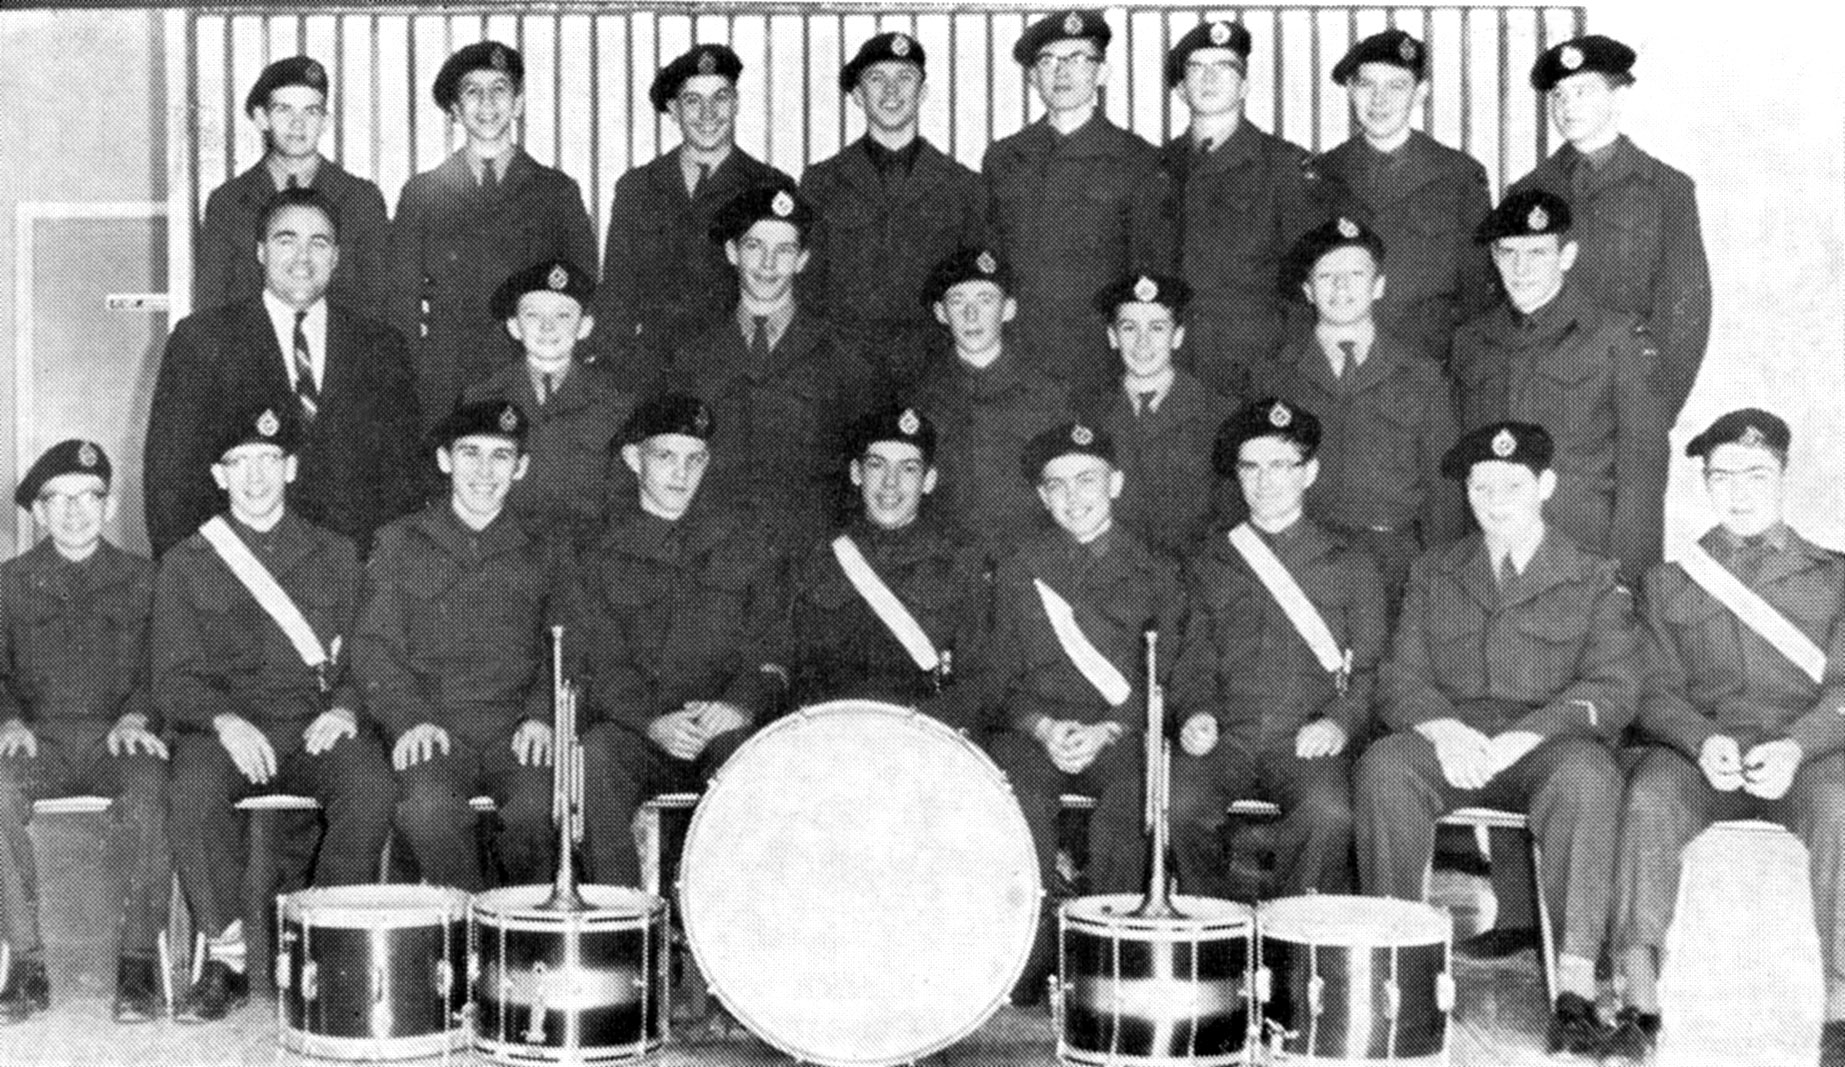 (Click to magnify) FRONT ROW: R. Andrews, R. Capstick, T. Ostroski, D. Cook, Brian St.John, H. Bunker, M. Puterbough, P. Ryan, J. Stonehouse; ***SECOND ROW: Mr. Ray Newton, Grant Mustard, M. Shadforth, Keith St.John, Rick Kelland, Sandy Ewen, G. Whitney; 